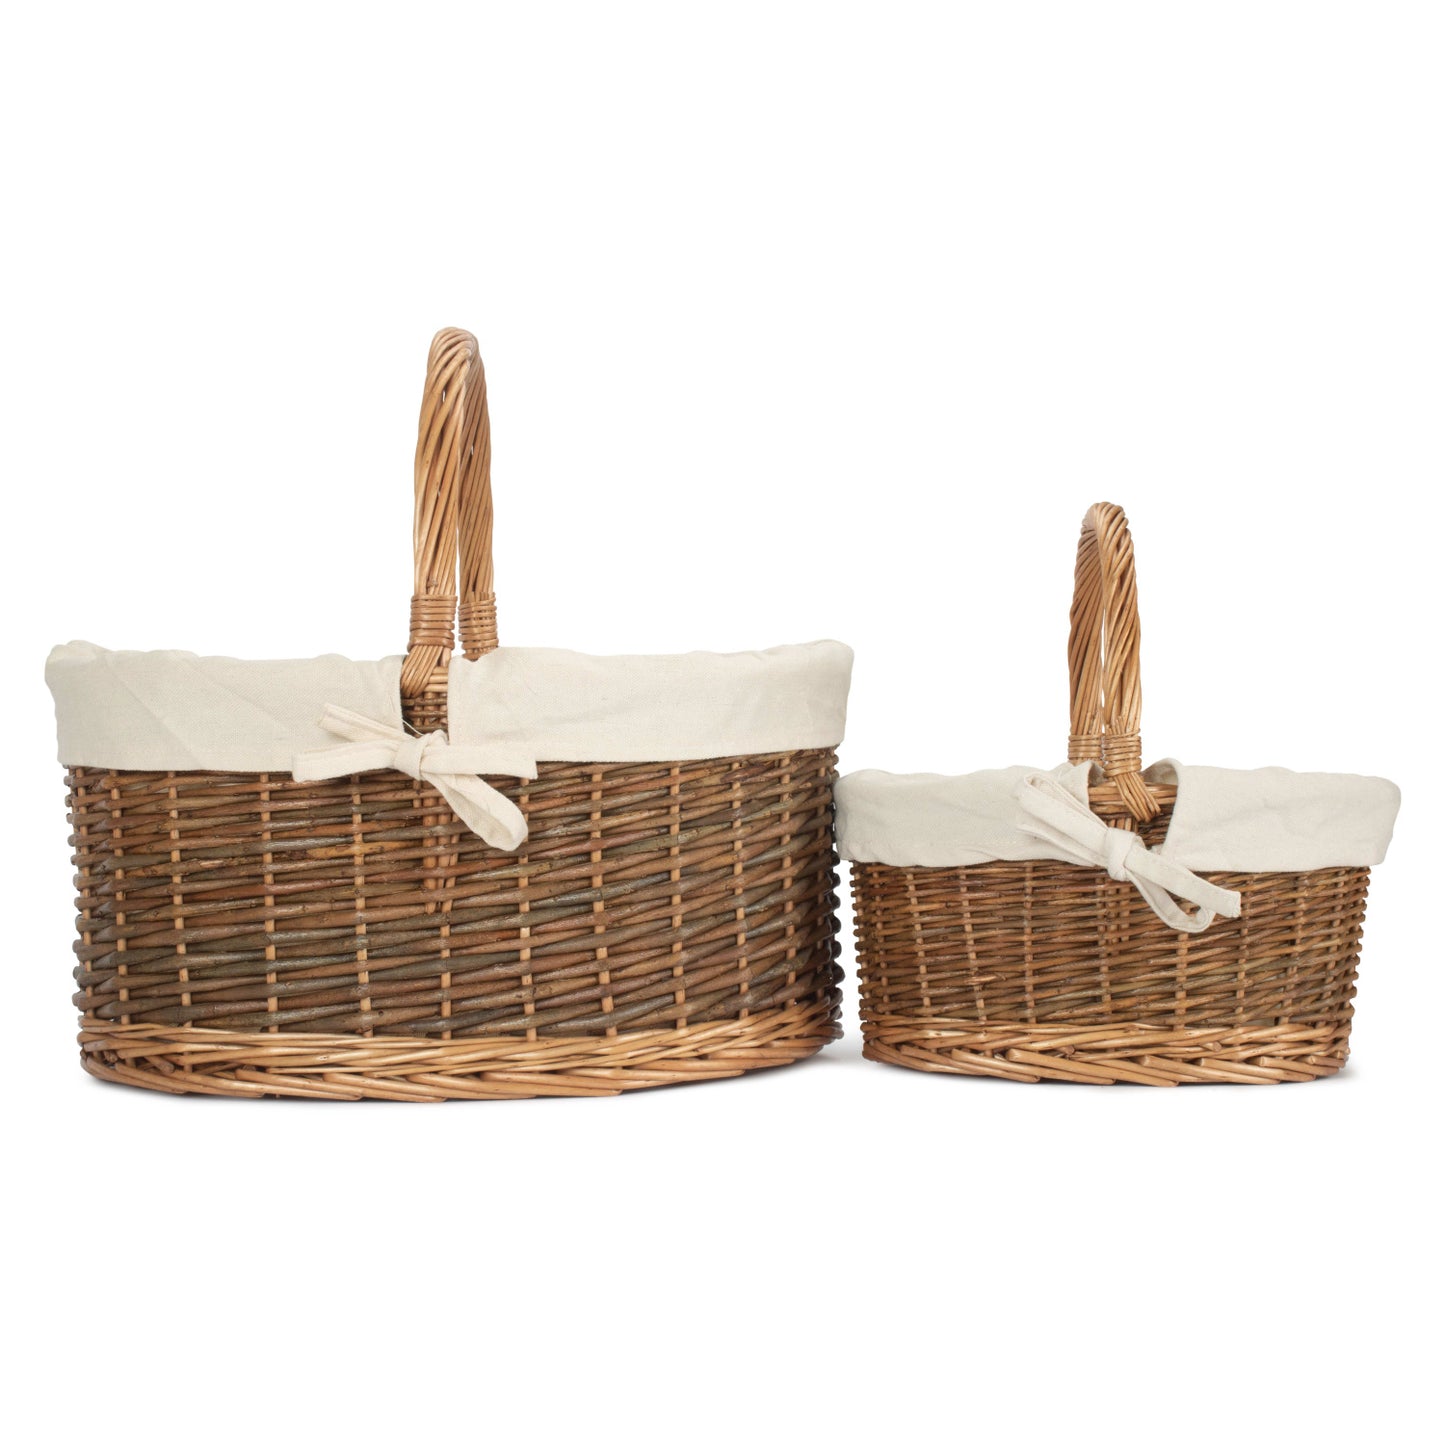 Country Oval Shopper With White Lining Set 2